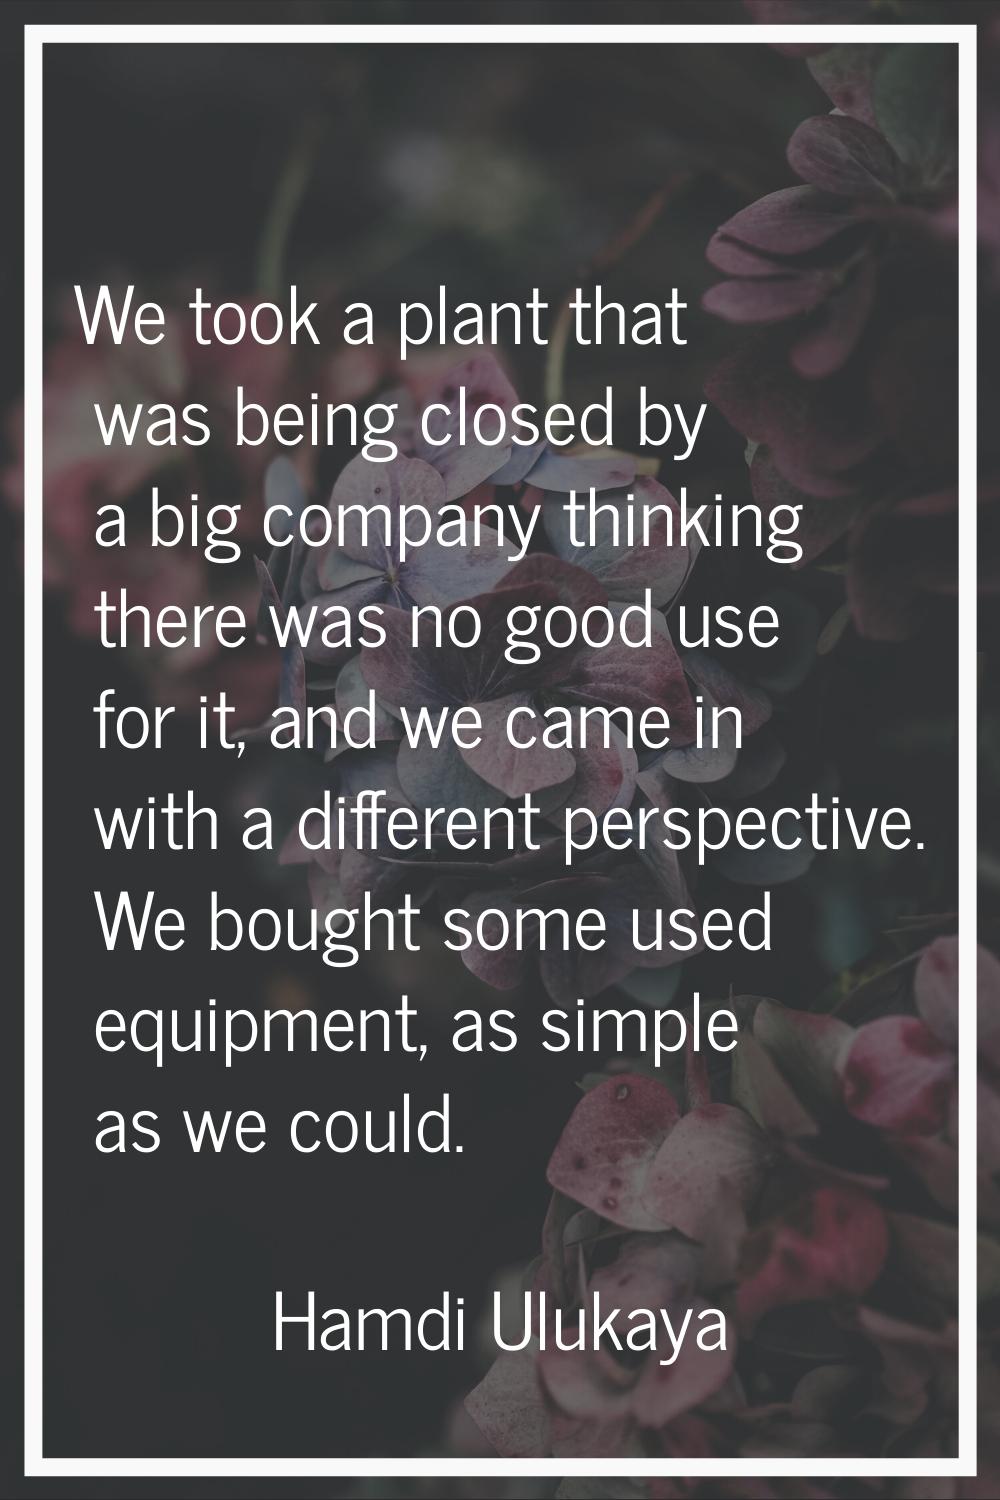 We took a plant that was being closed by a big company thinking there was no good use for it, and w